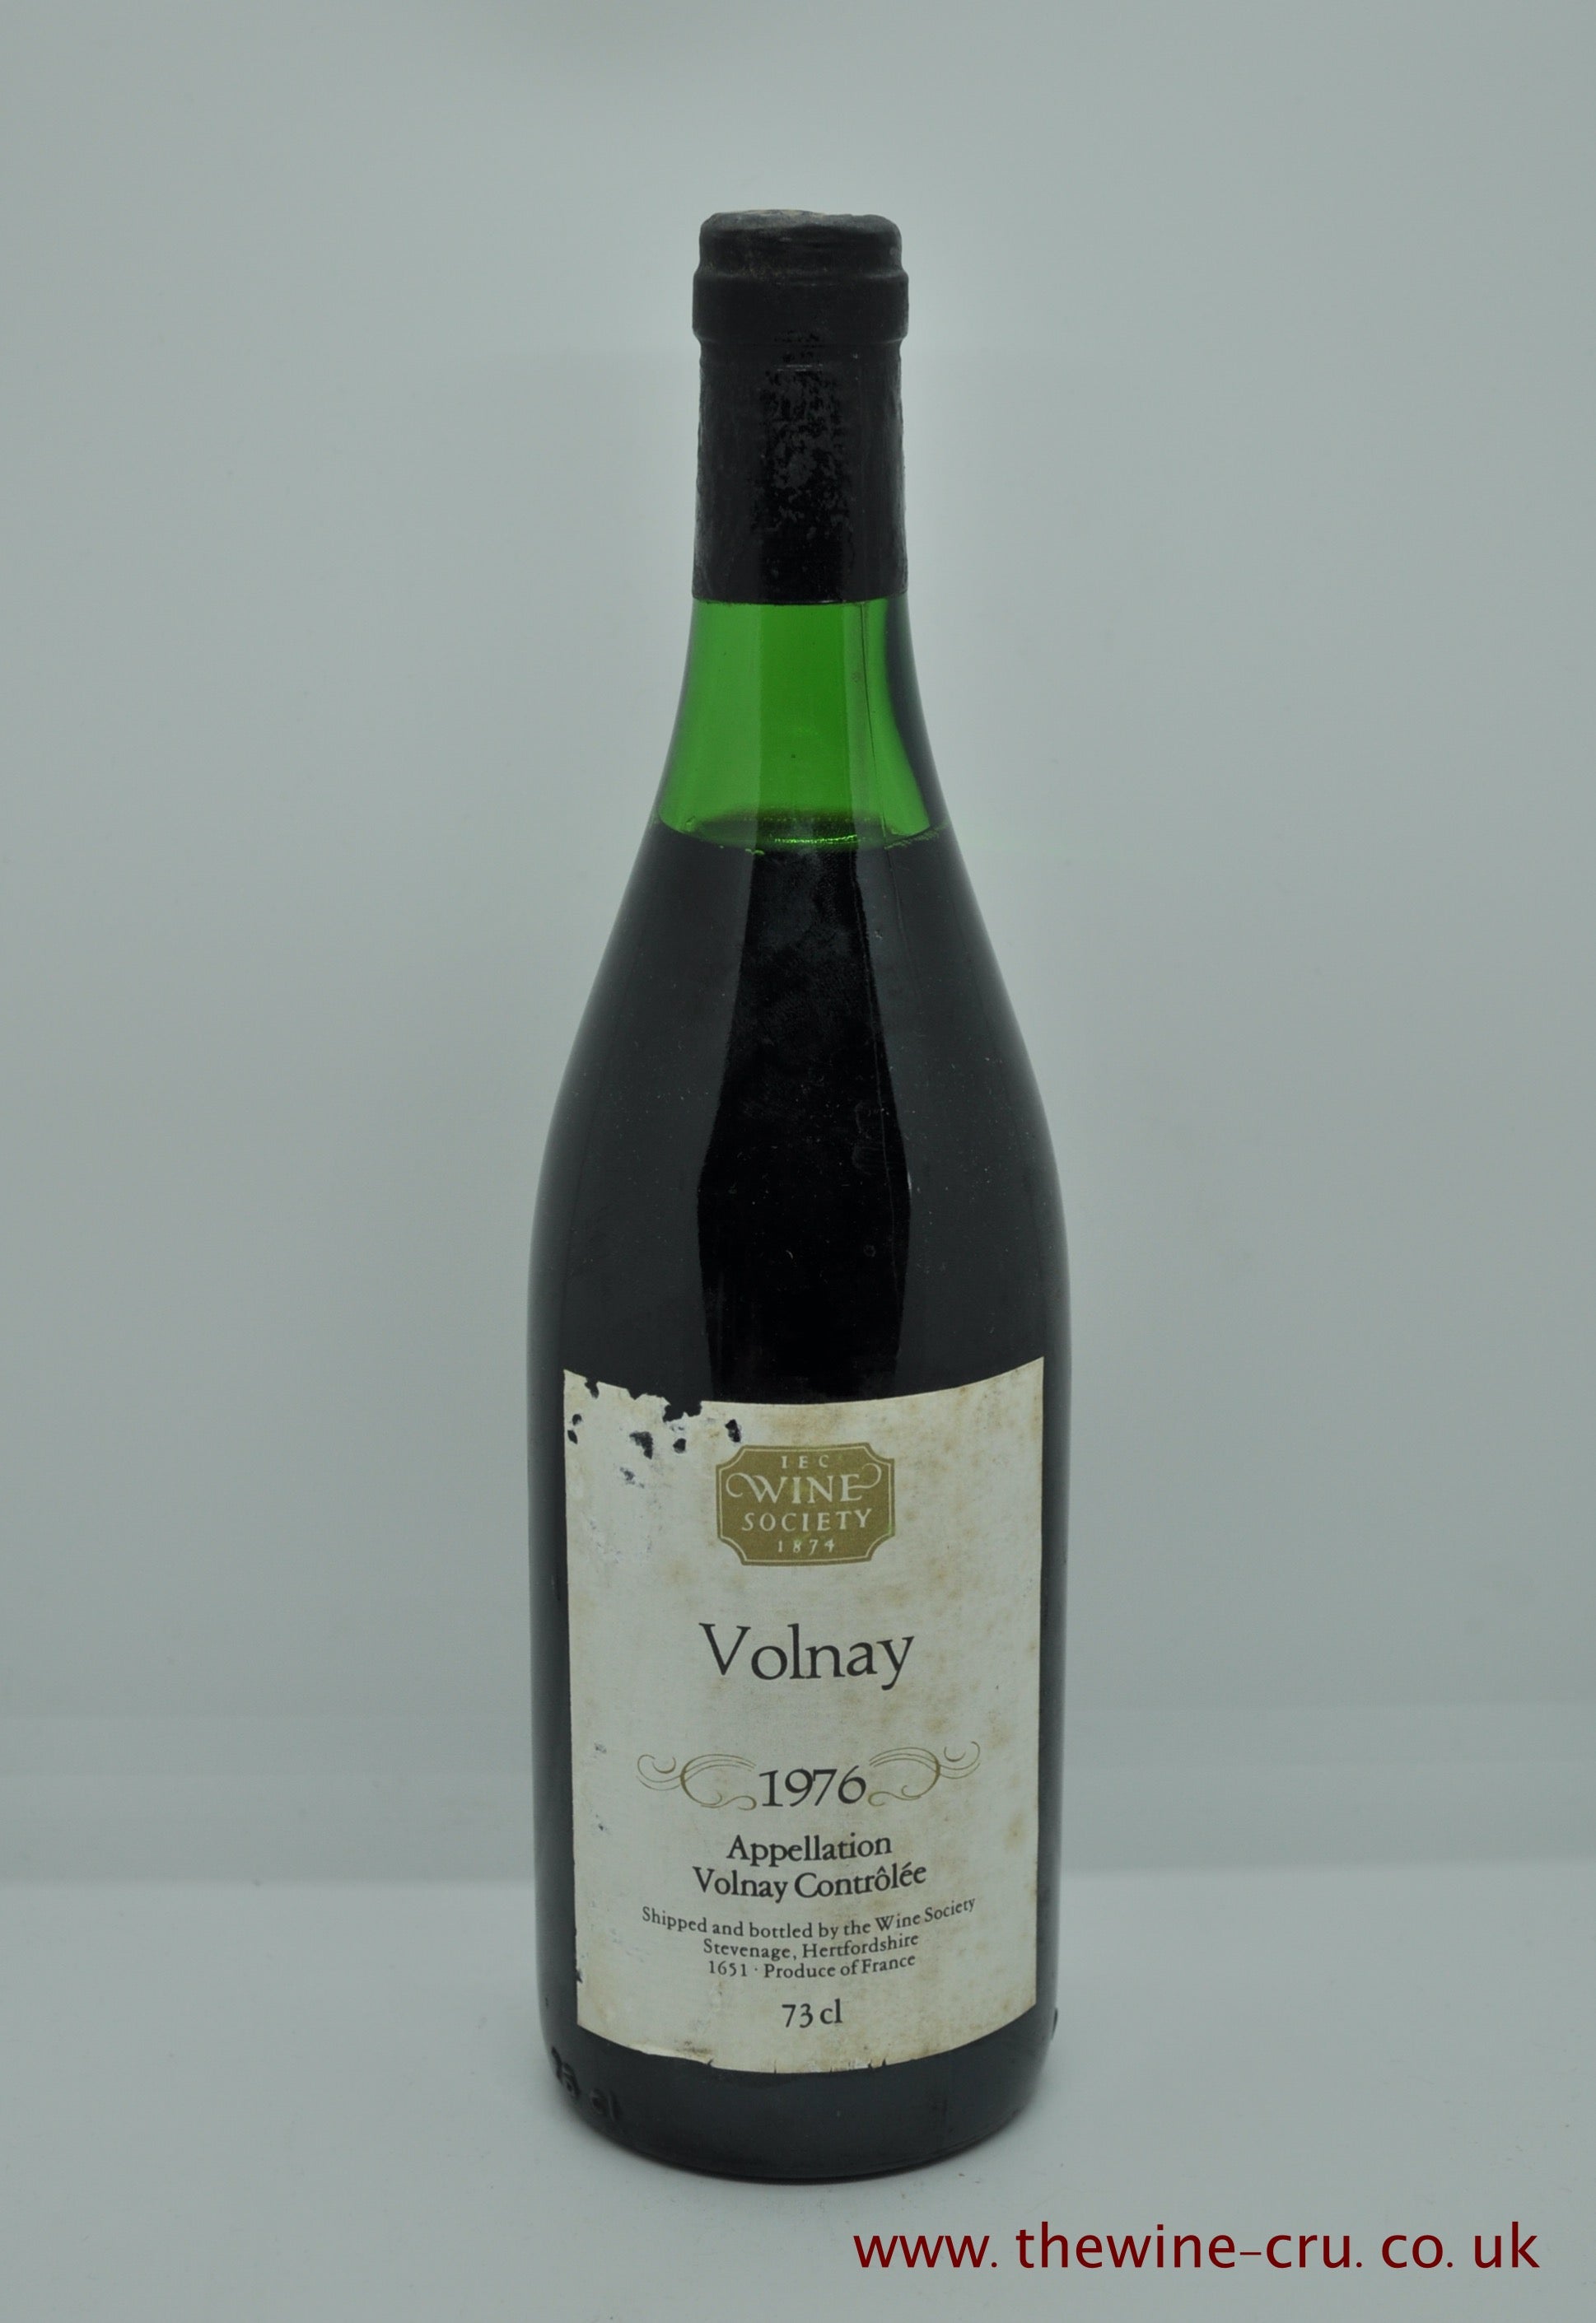 A Wine Society bottling of a 1976 red wine from Volnay in the Cote de Beaune, Burgundy, France. The bottle is in good condition. Immediate delivery. Free local delivery. Gift wrapping available.